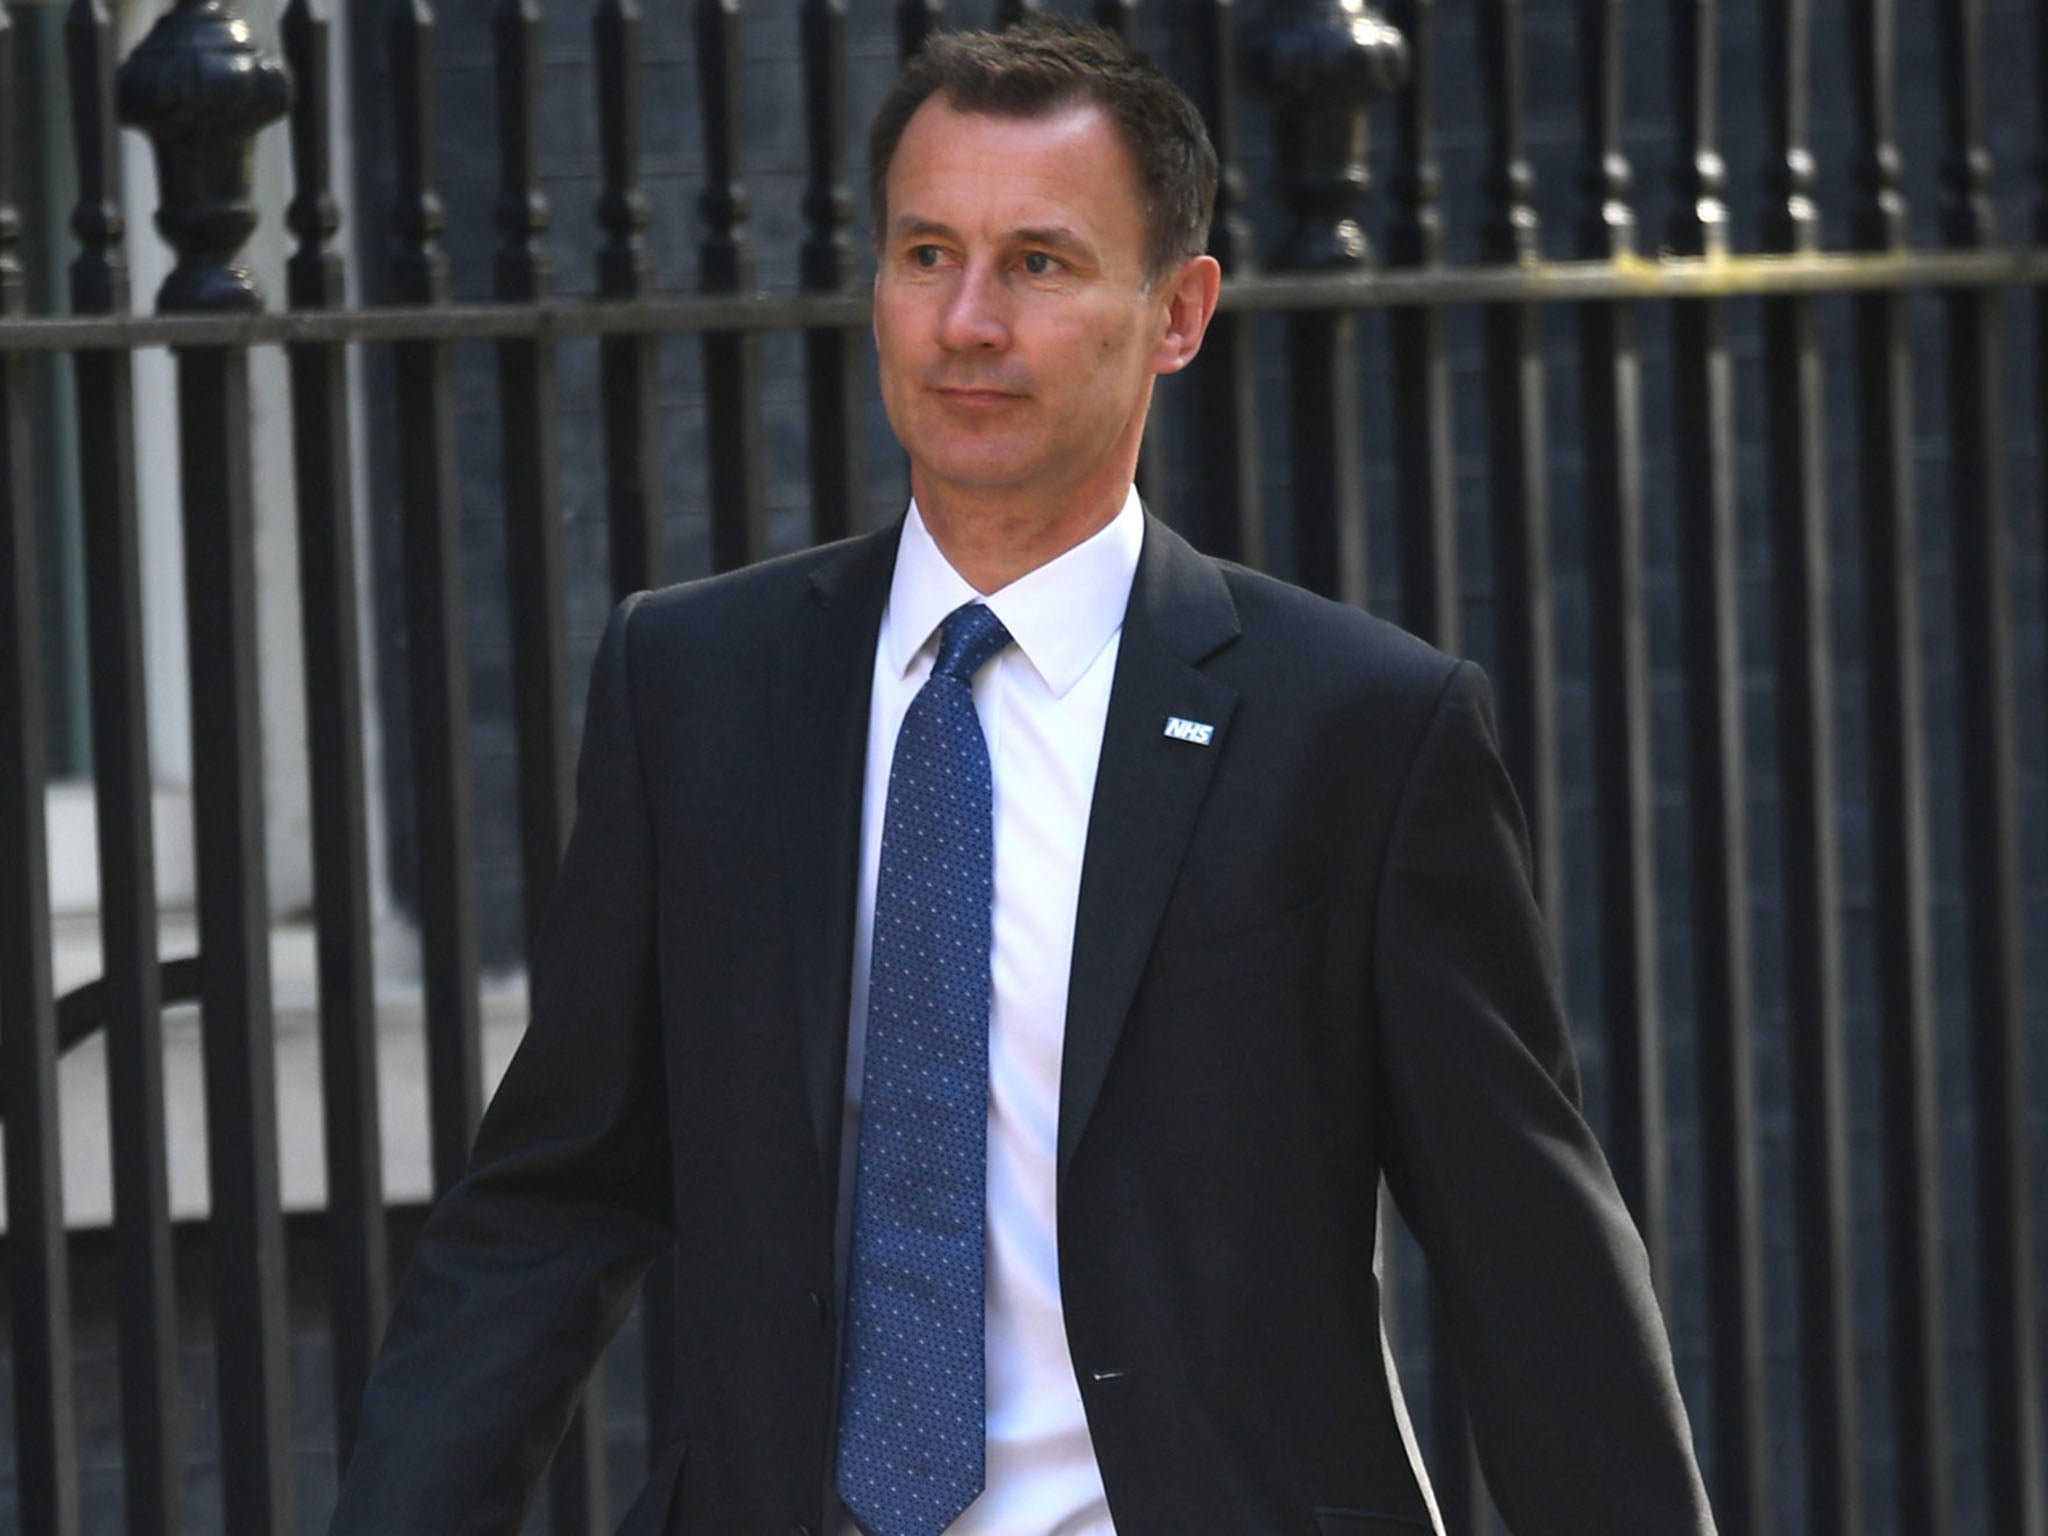 NHS use of &apos;fatal&apos; syringes to be examined, says Jeremy Hunt